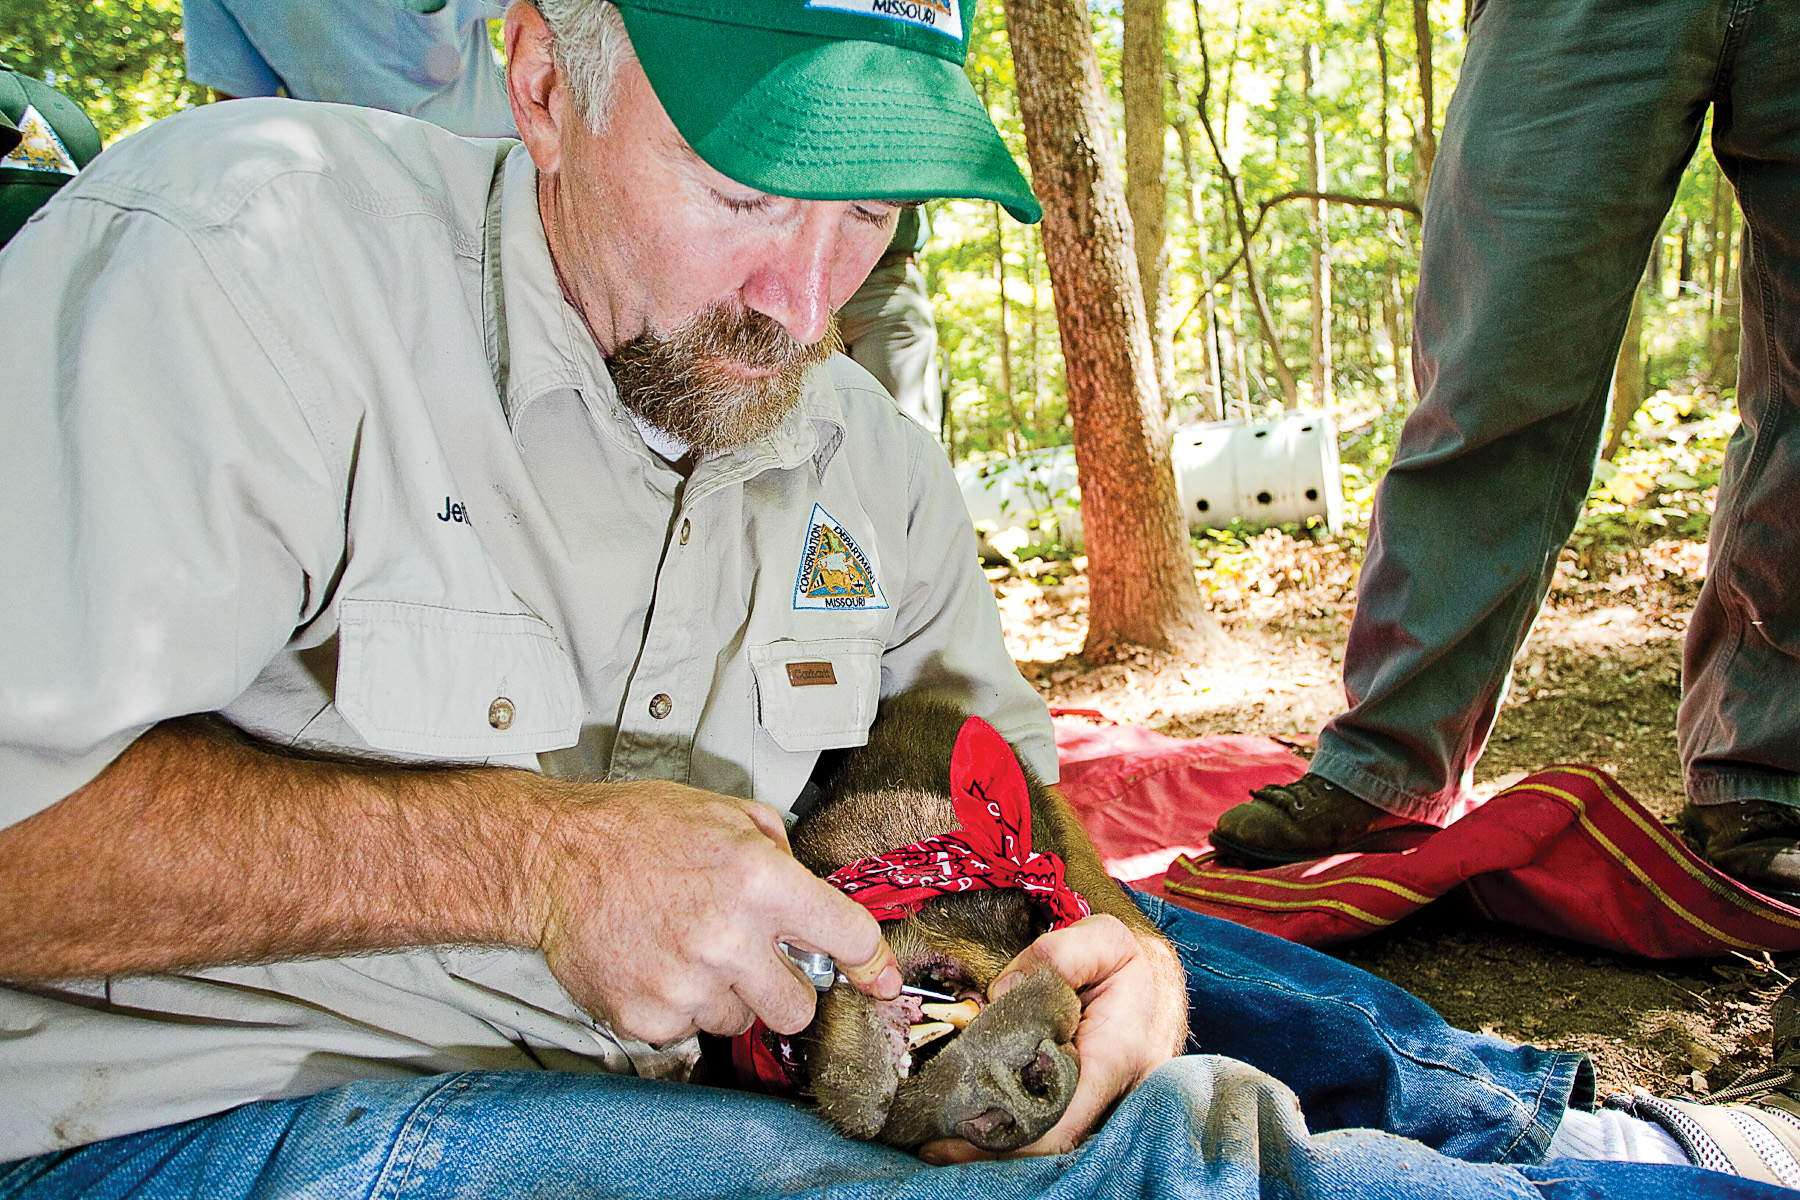 MDC biologist extracts a tooth from a tranquilized black bear for study